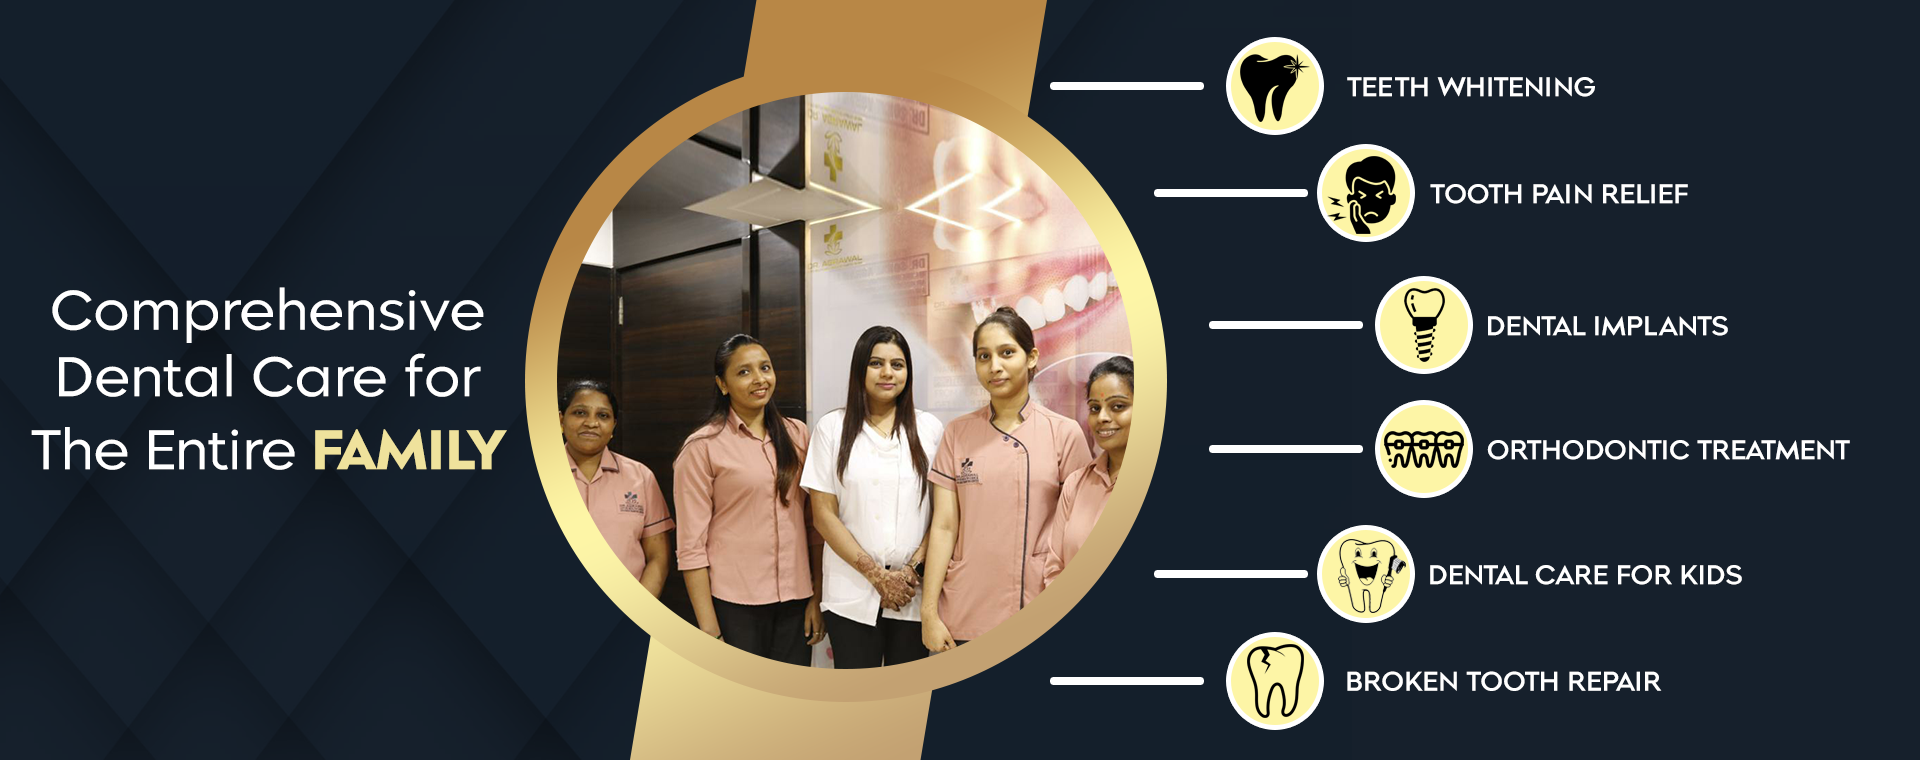 Comprehensive Dental care by Dr. Sonal Agrawal Best Dentist and Top Dental Specialist at Lotus Dental Care Clinic, Best Dental Clinic in Vashi, Navi Mumbai